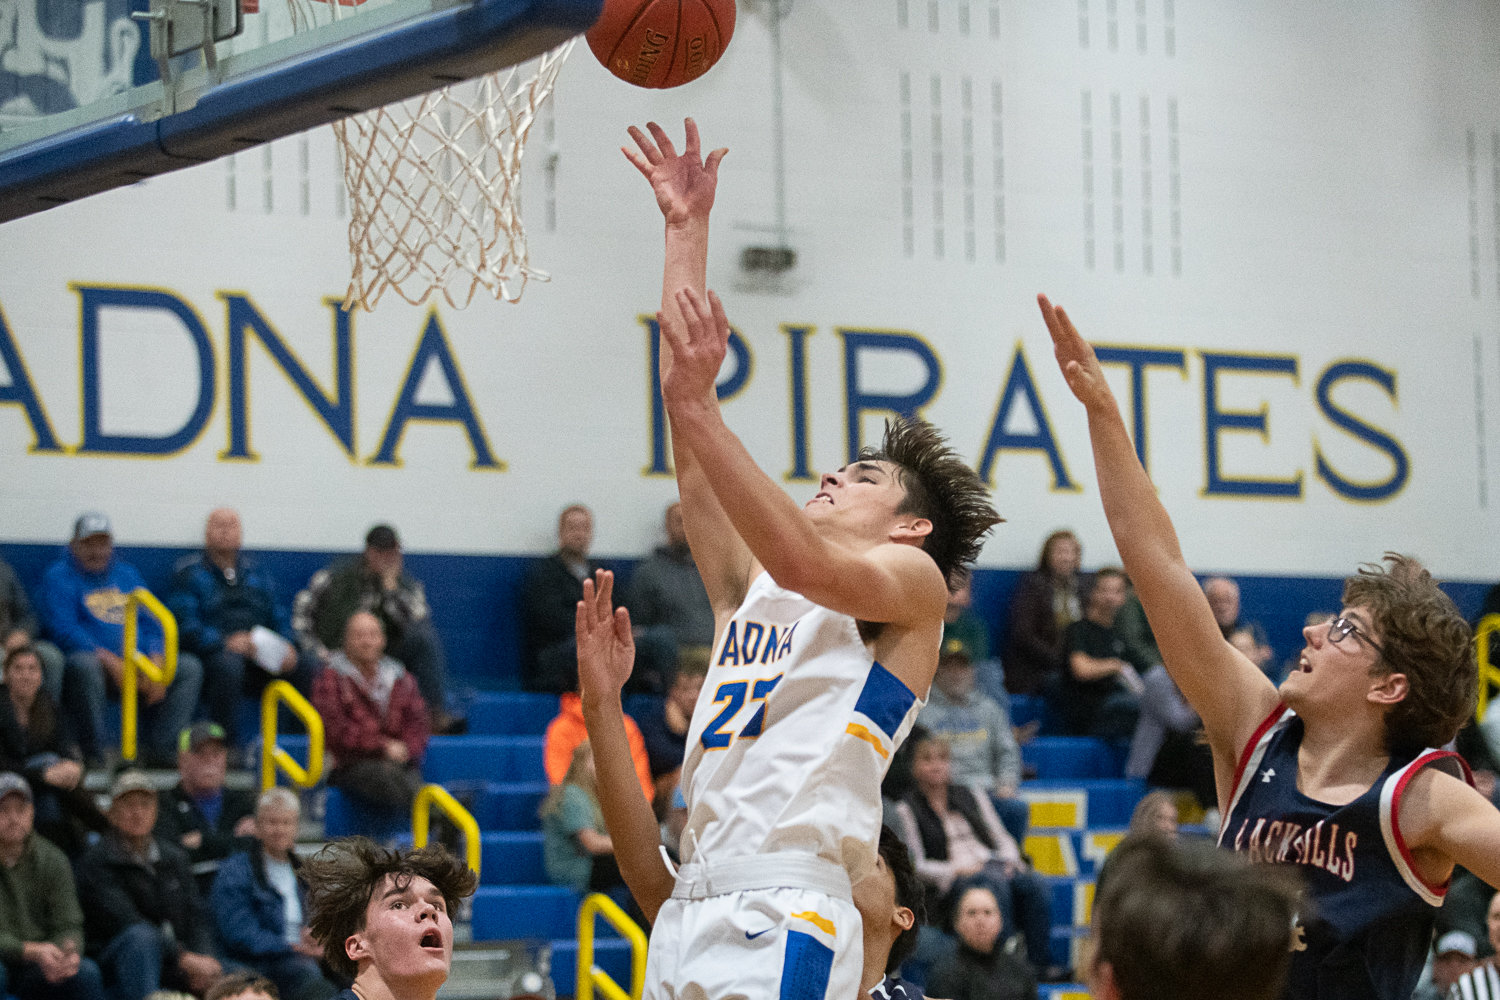 Adna's Eli Smith goes to the rim during the first half of the Pirates' 67-60 win over Black Hills on Nov. 29.